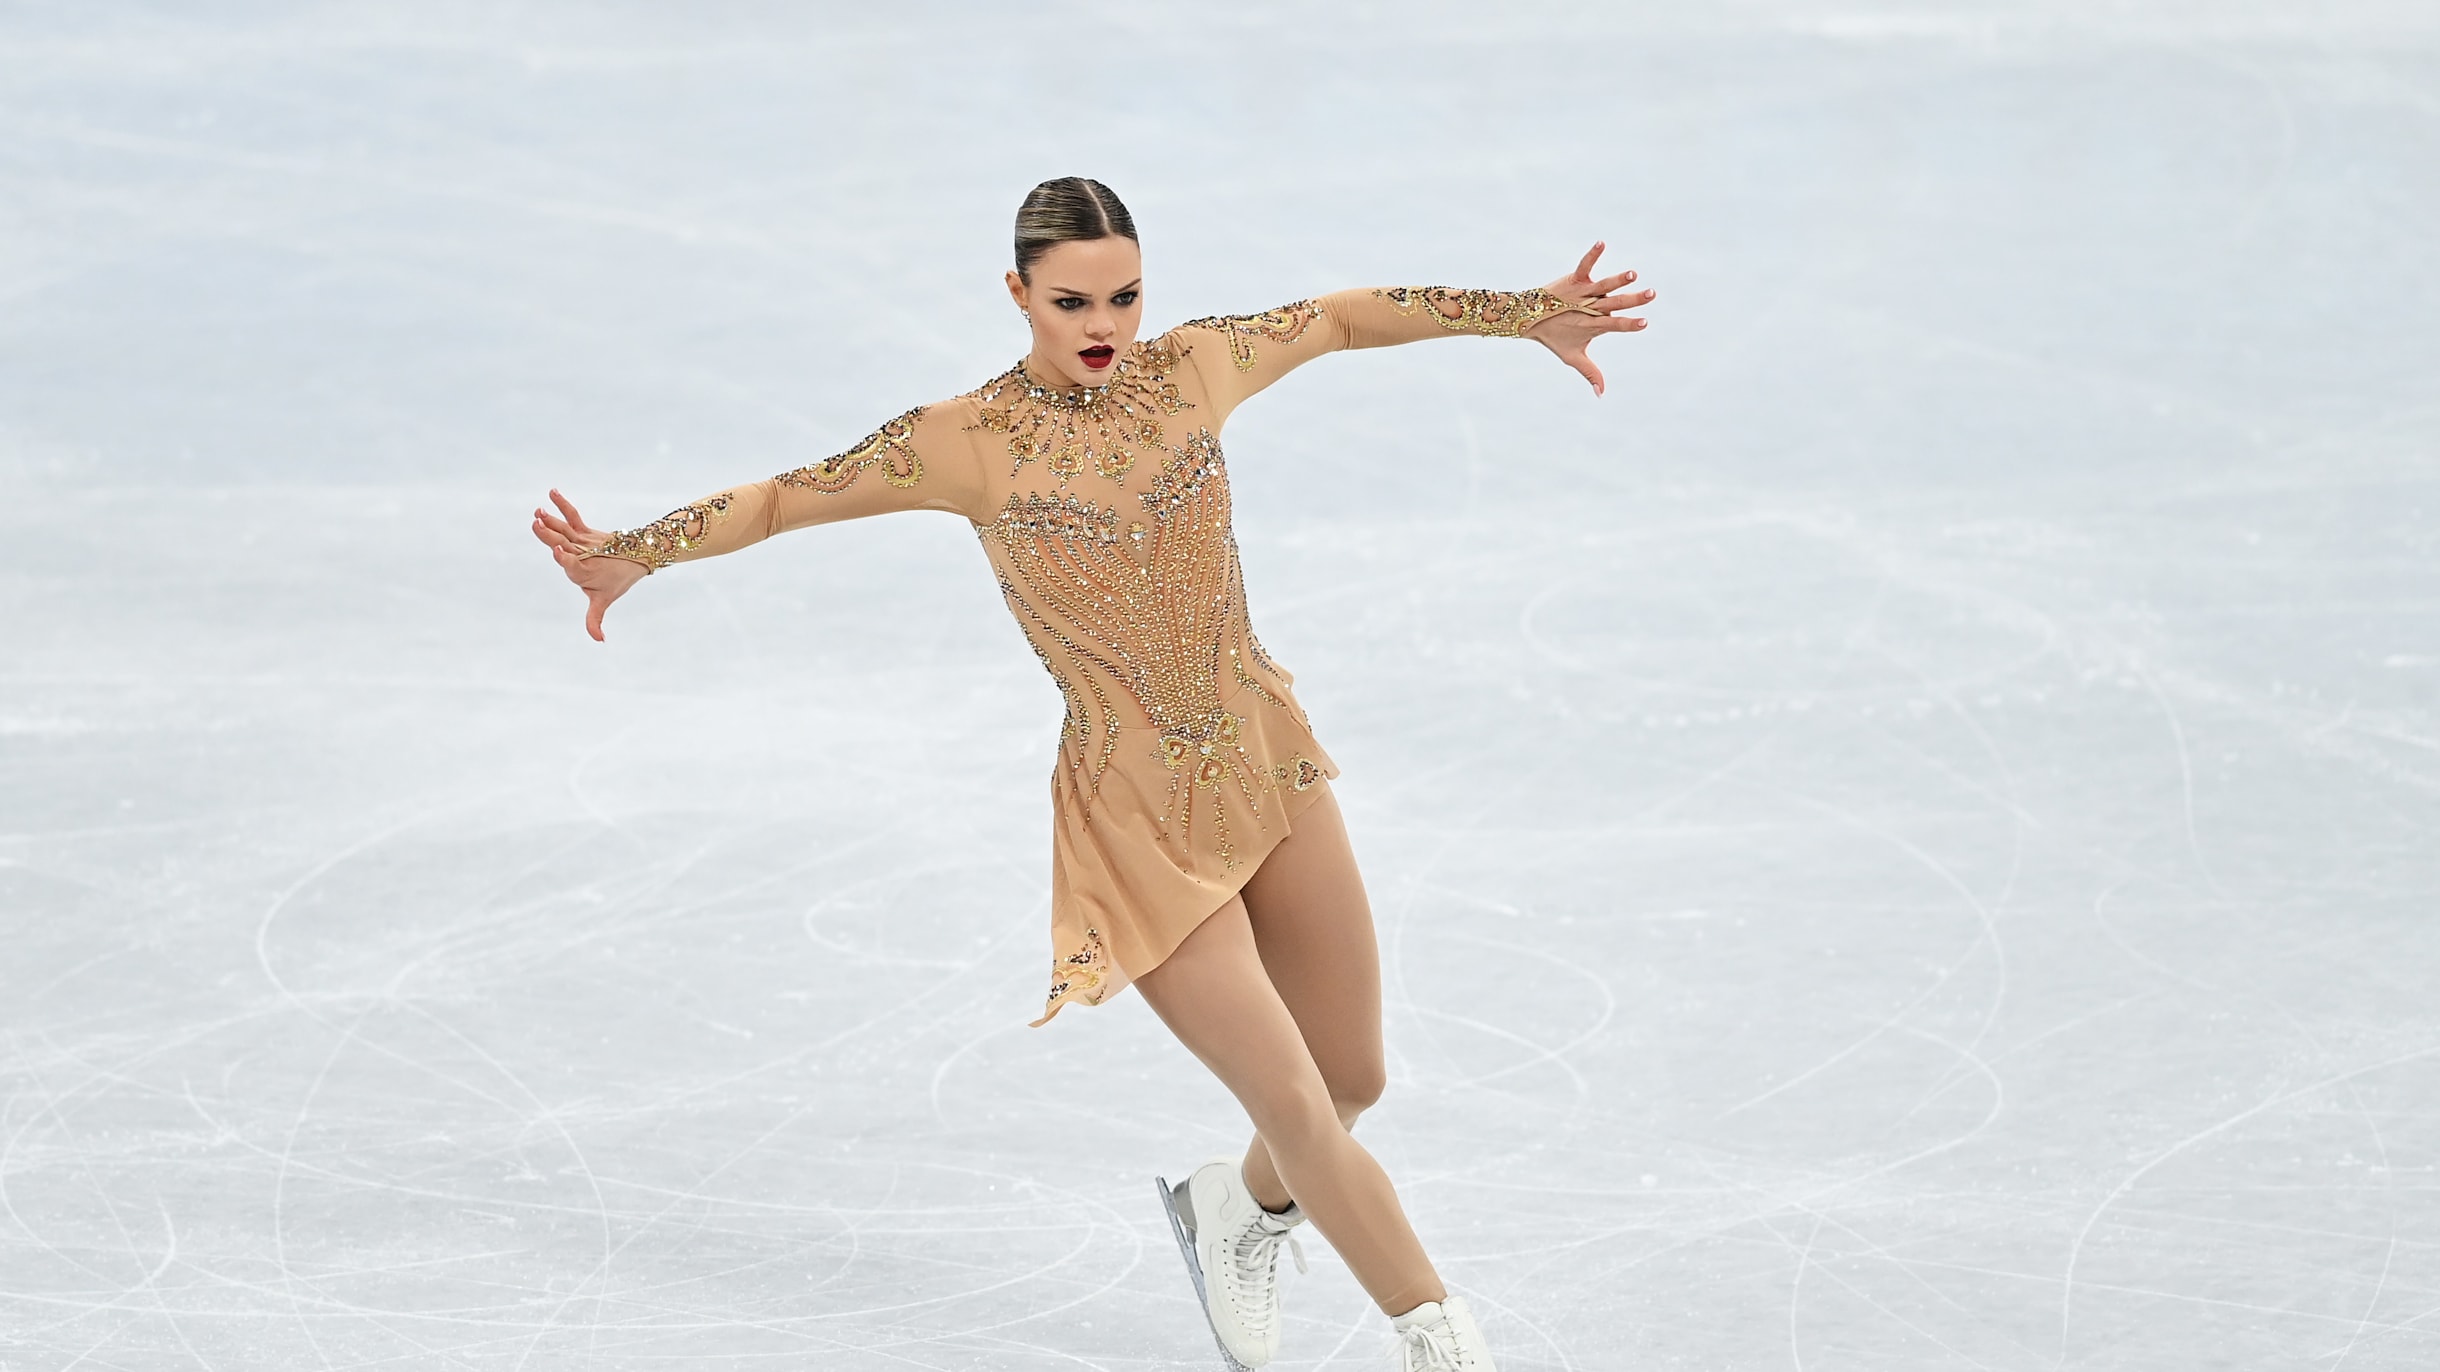 Olympic Figure Skating Gala at Beijing 2022 Everything you need to know about Loena Hendrickx